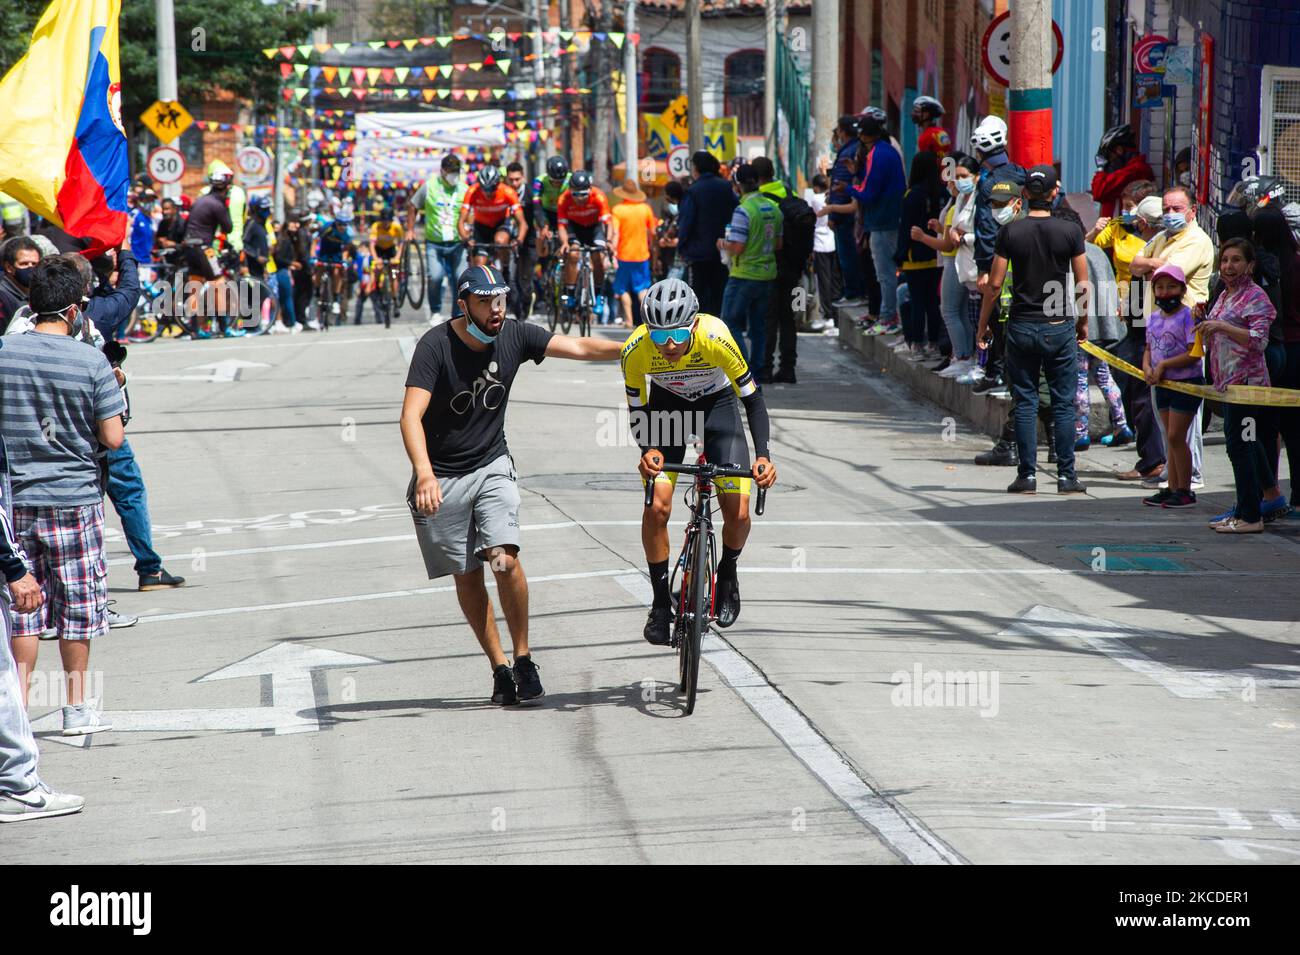 A viewer of the 2021 Vuelta a Colombia final stage circuit in Bogota, pushes a ciclyst to help him climb faster the stage during the climb of the Perseverancia neigborhood in Bogota, Colombia on April 25, 2021 won by the Colombian ciclyst Tito Hernandez. (Photo by Sebastian Barros/NurPhoto) Stock Photo